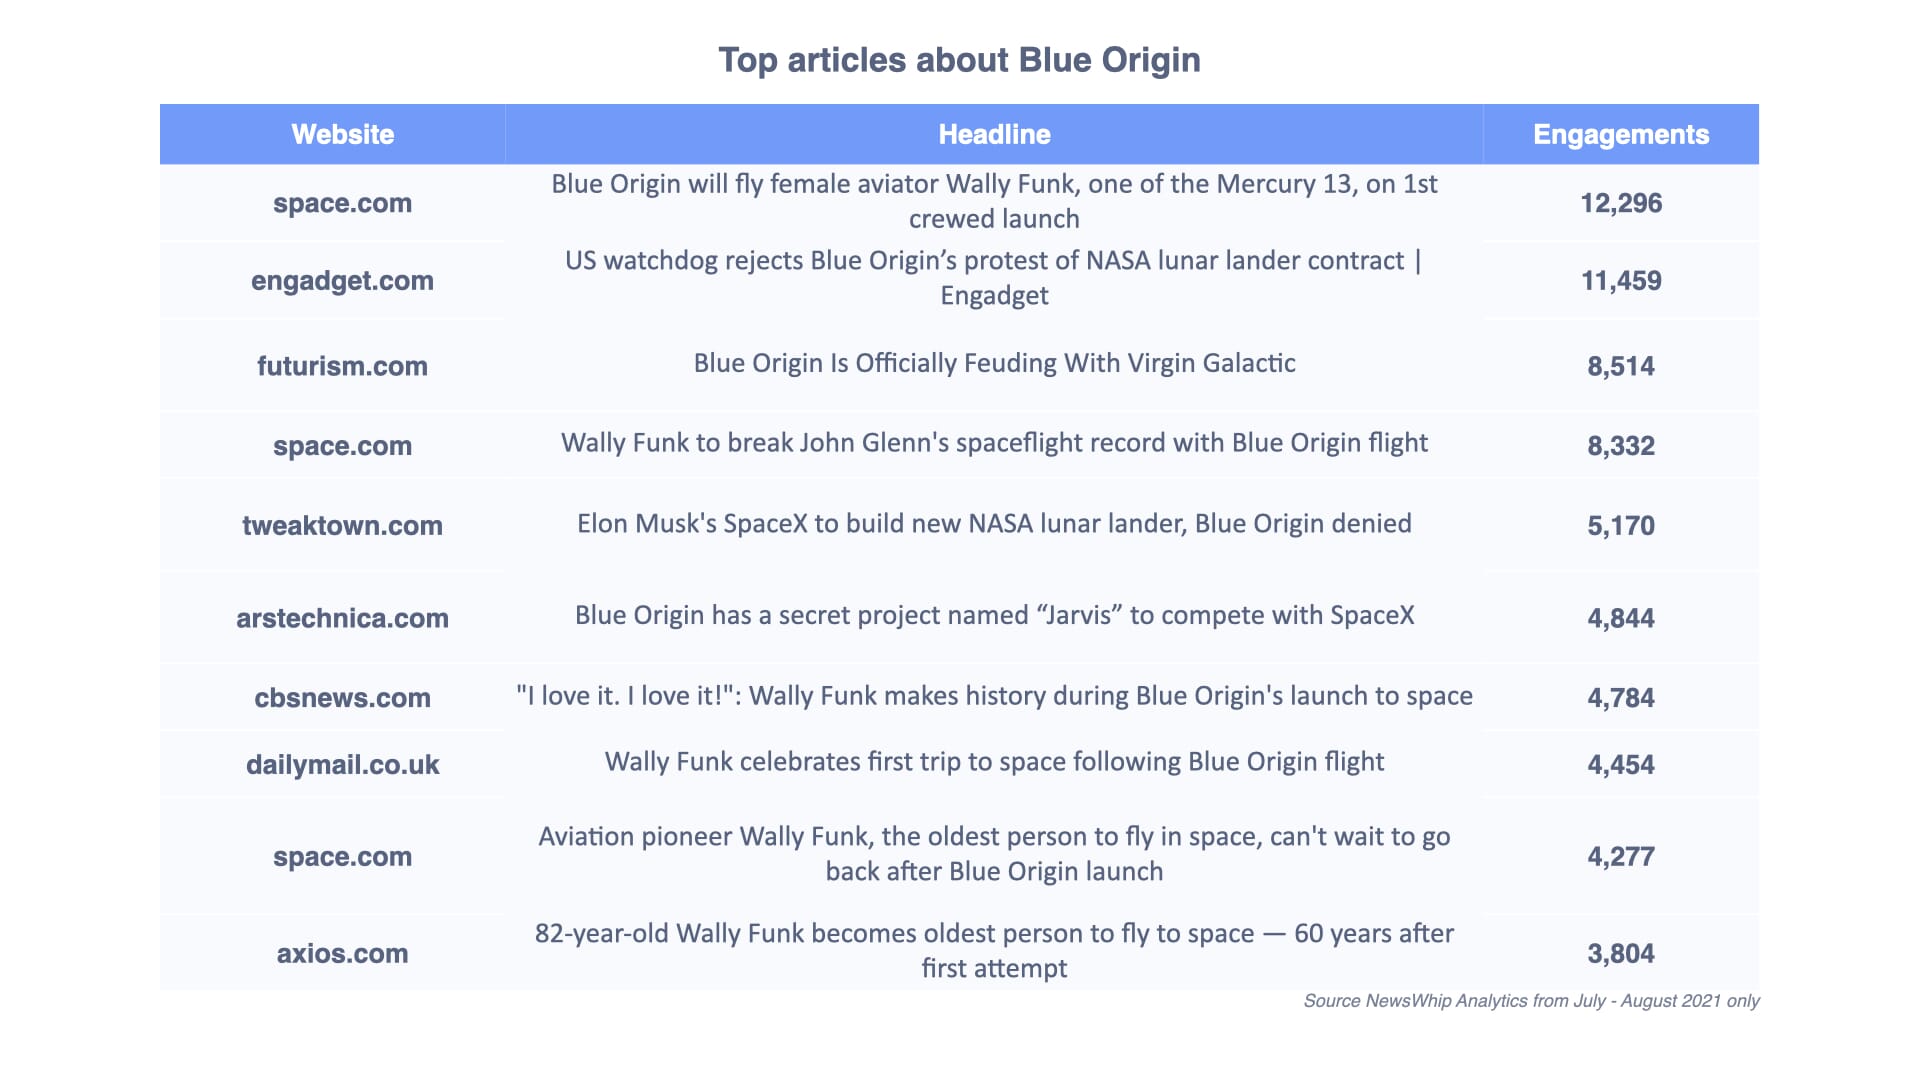 Top stories about Blue Origin not mentioning Jeff Bezos, ranked by engagement